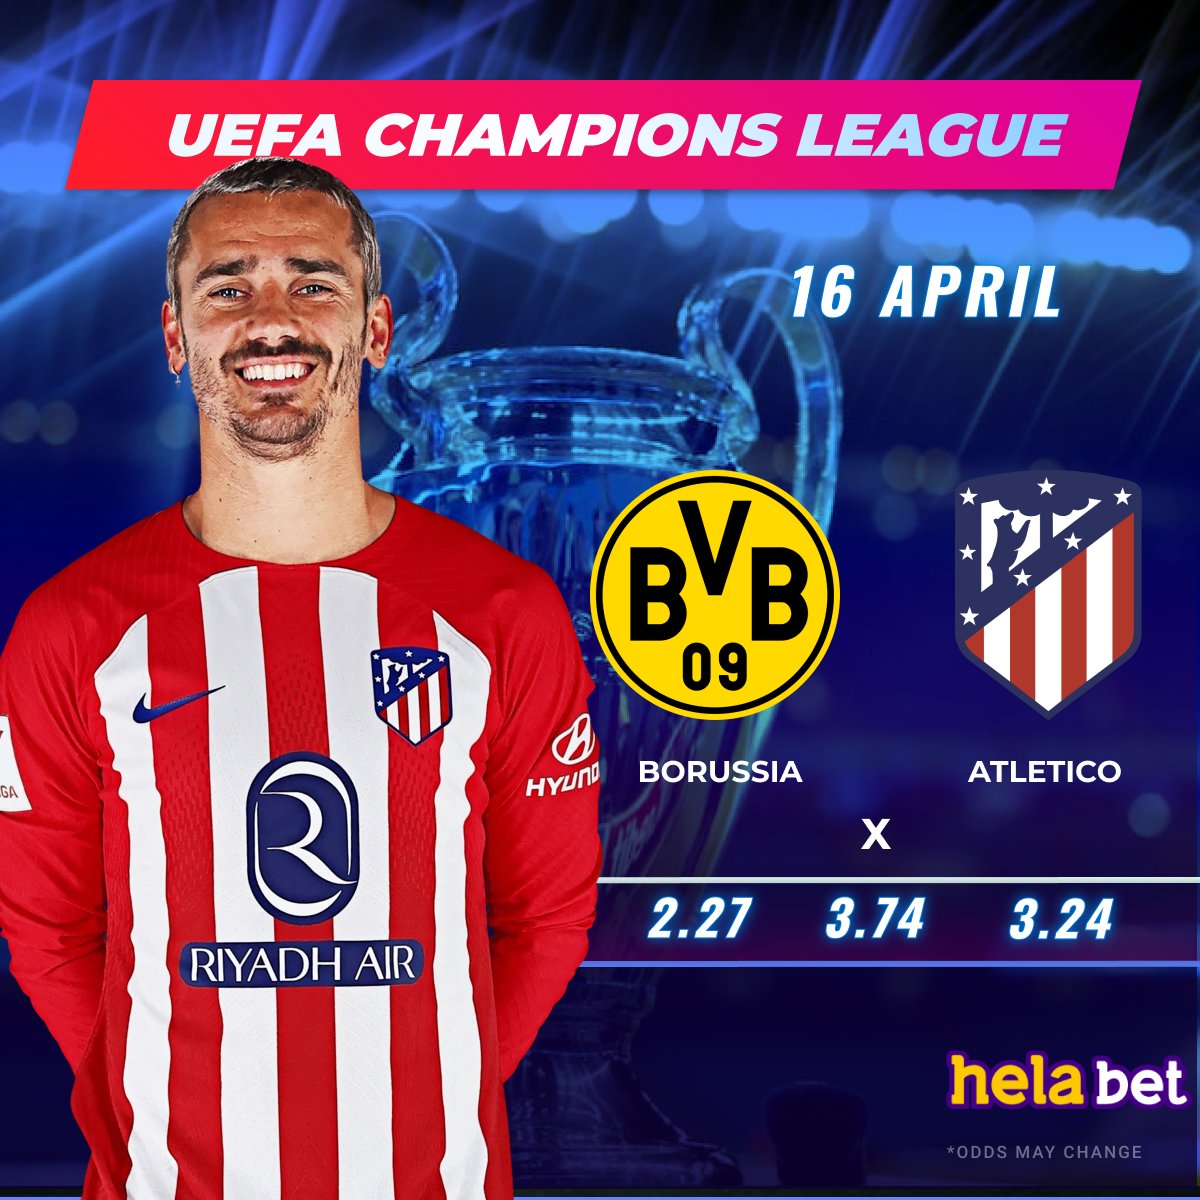 🔥 Champions League return match🔥 ⚽ #Borussia vs #Atletico ❓ Who will win the match? 👍Place your bet in #Helabet 👉 cutt.ly/UwY8h1uG #uefa #championsleague #football